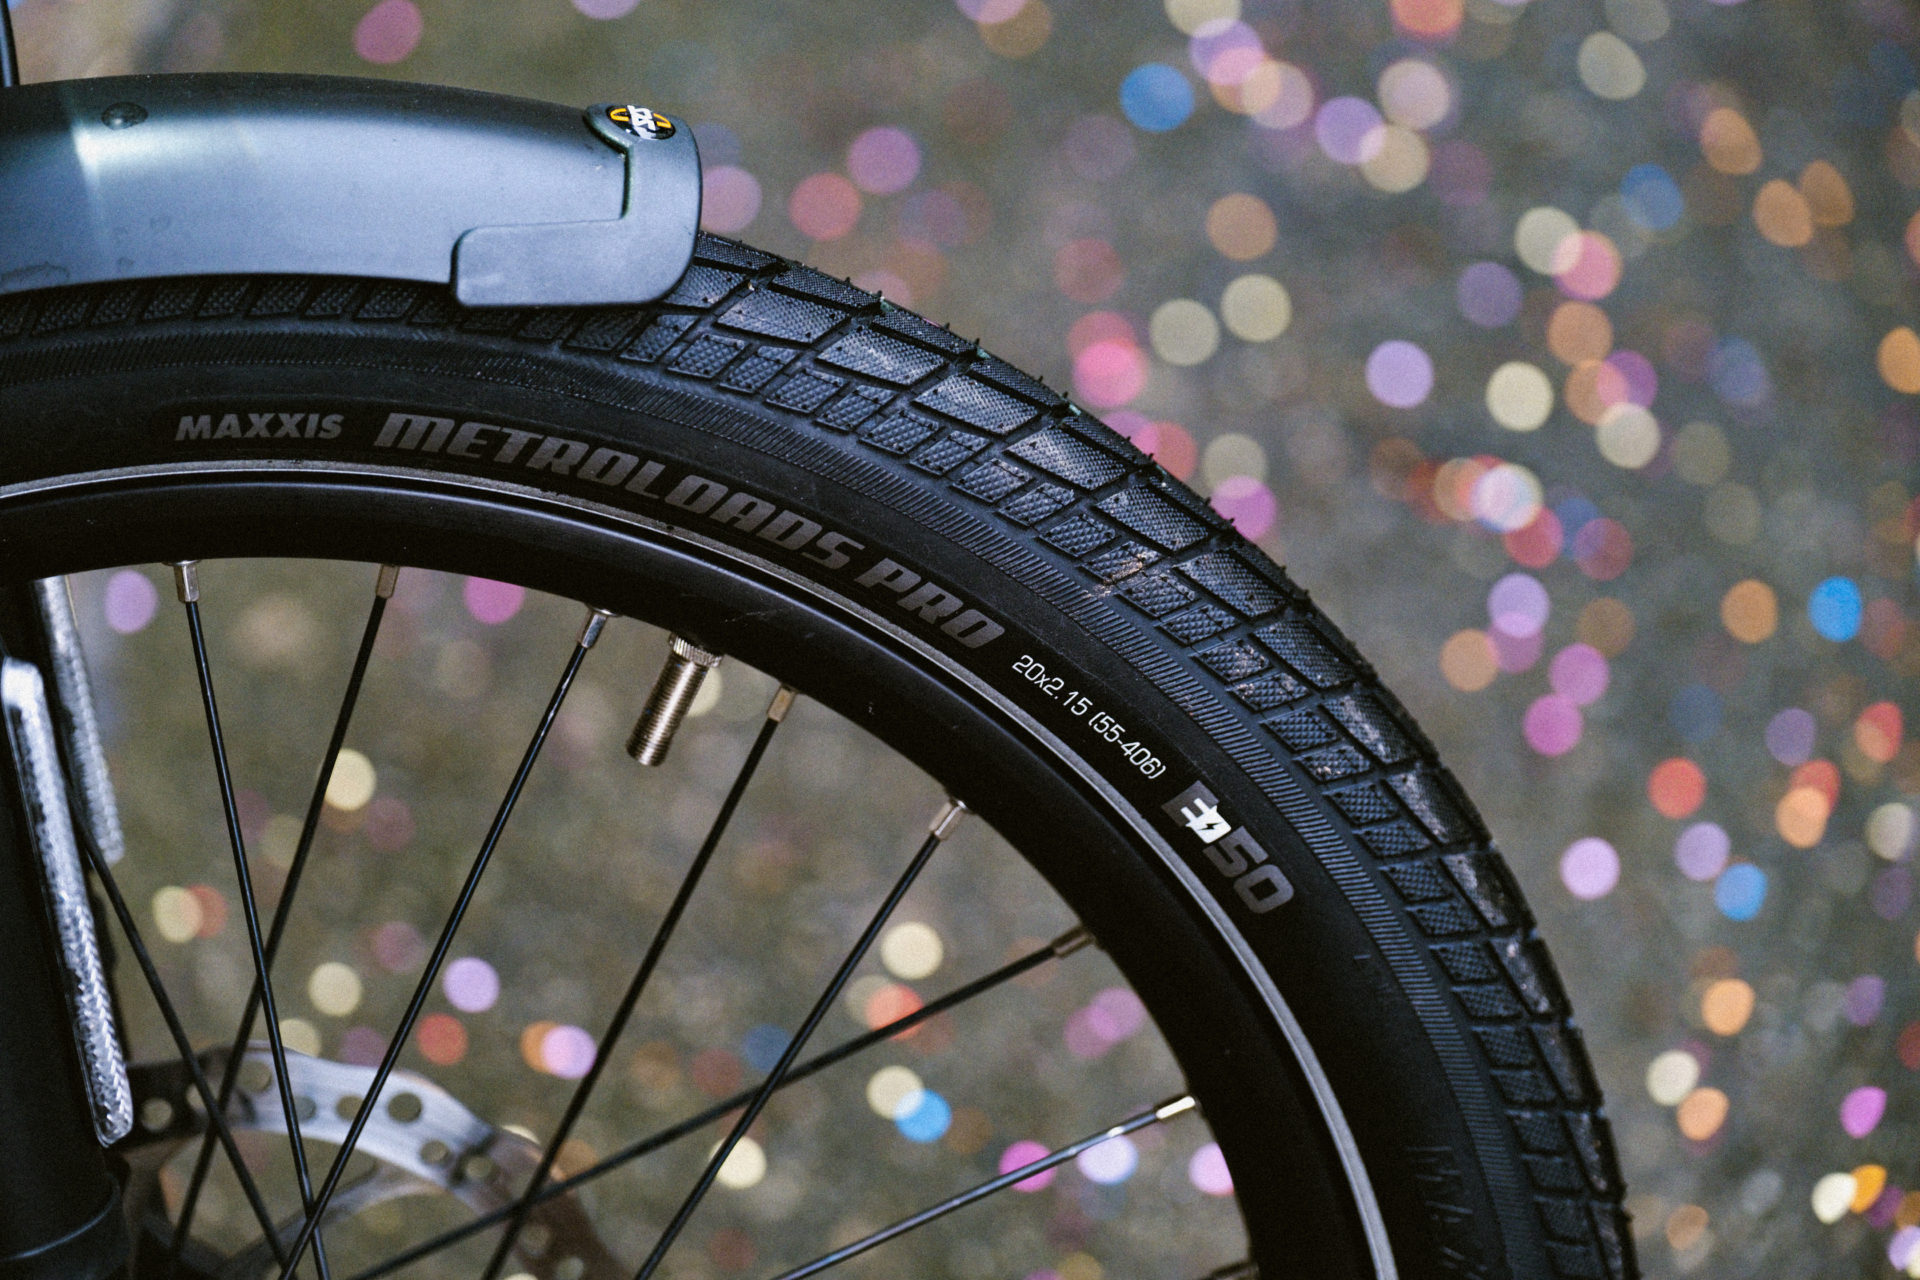 Close up on Maxxis urban commuter tire